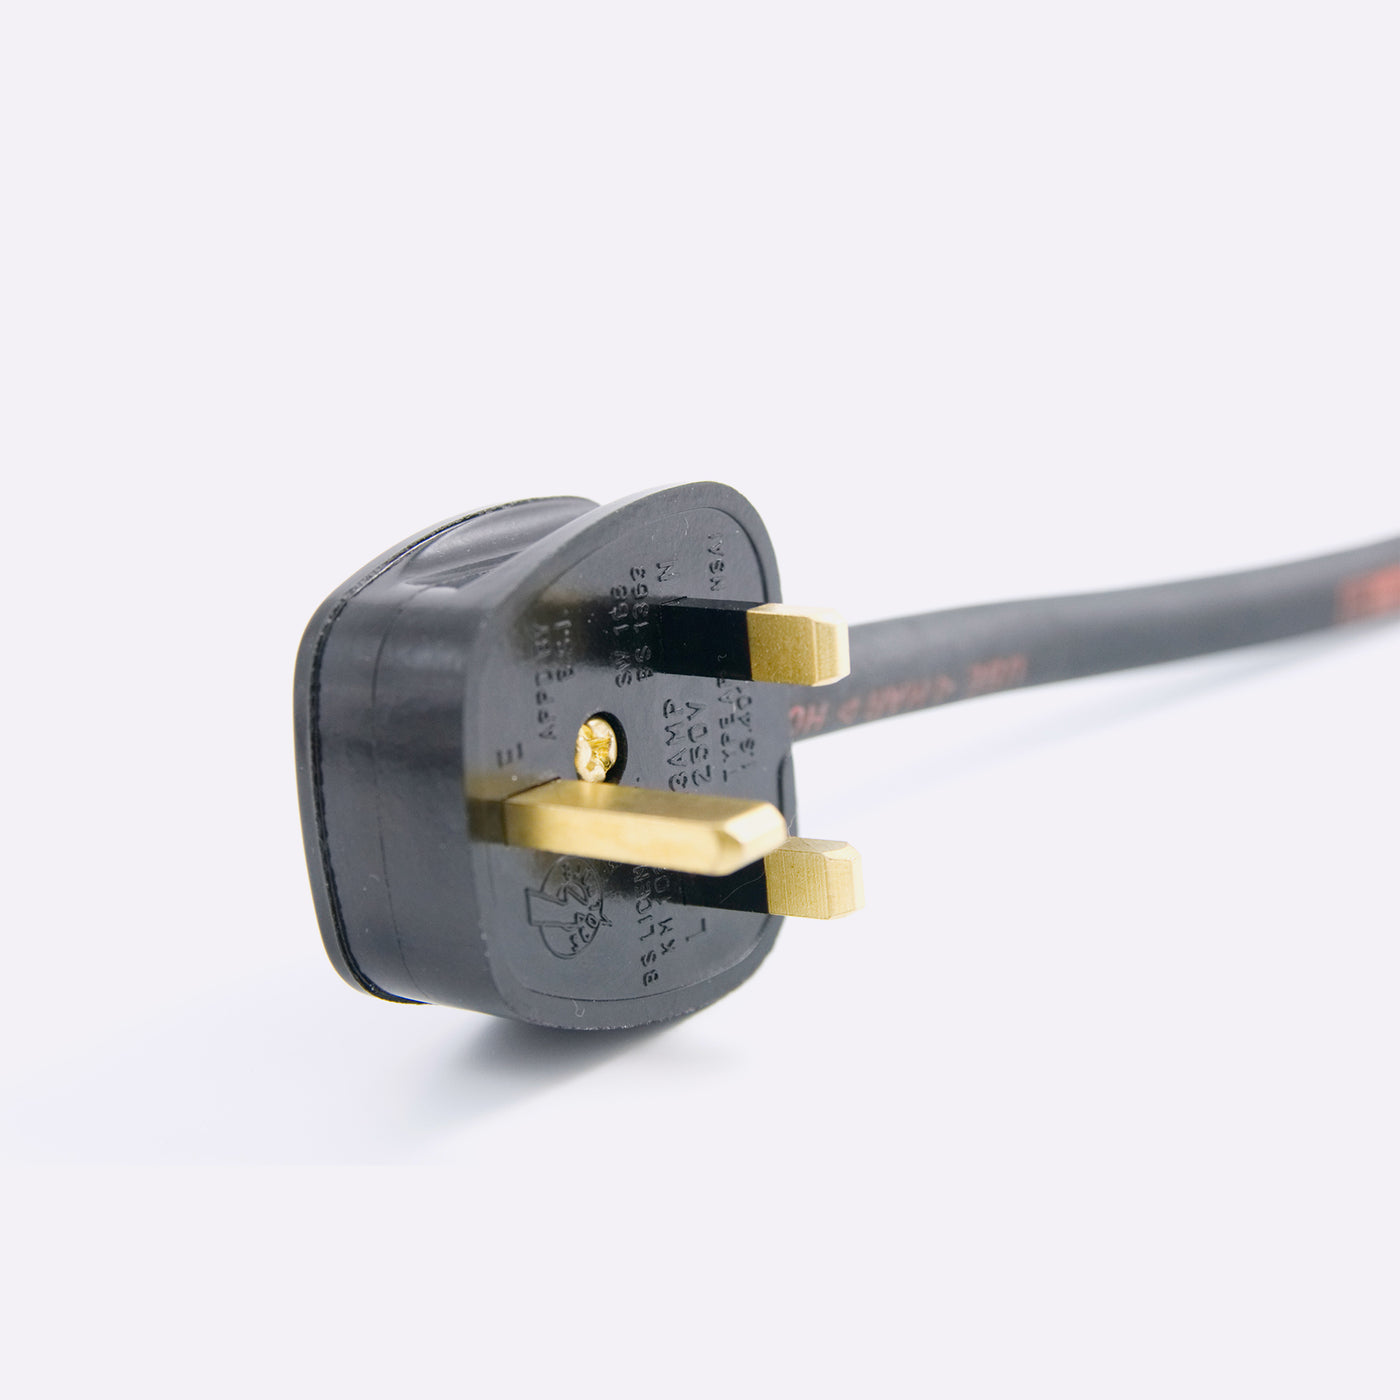 Charging cable for domestic power outlet / Type 1 - MINICHARGER